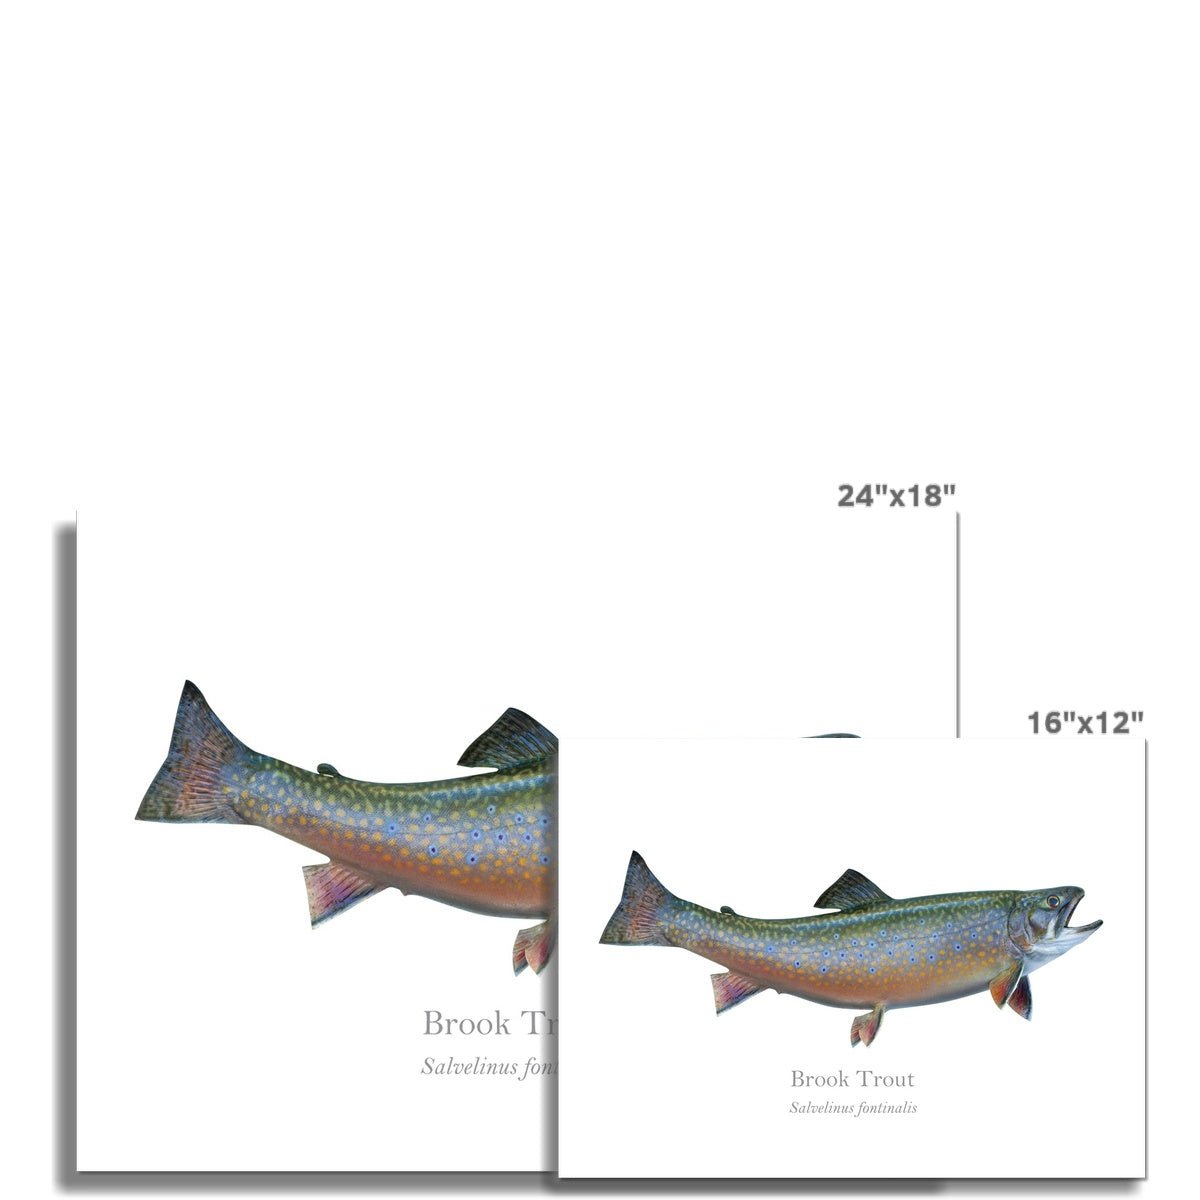 Brook Trout - Art Print - With Scientific Name - madfishlab.com